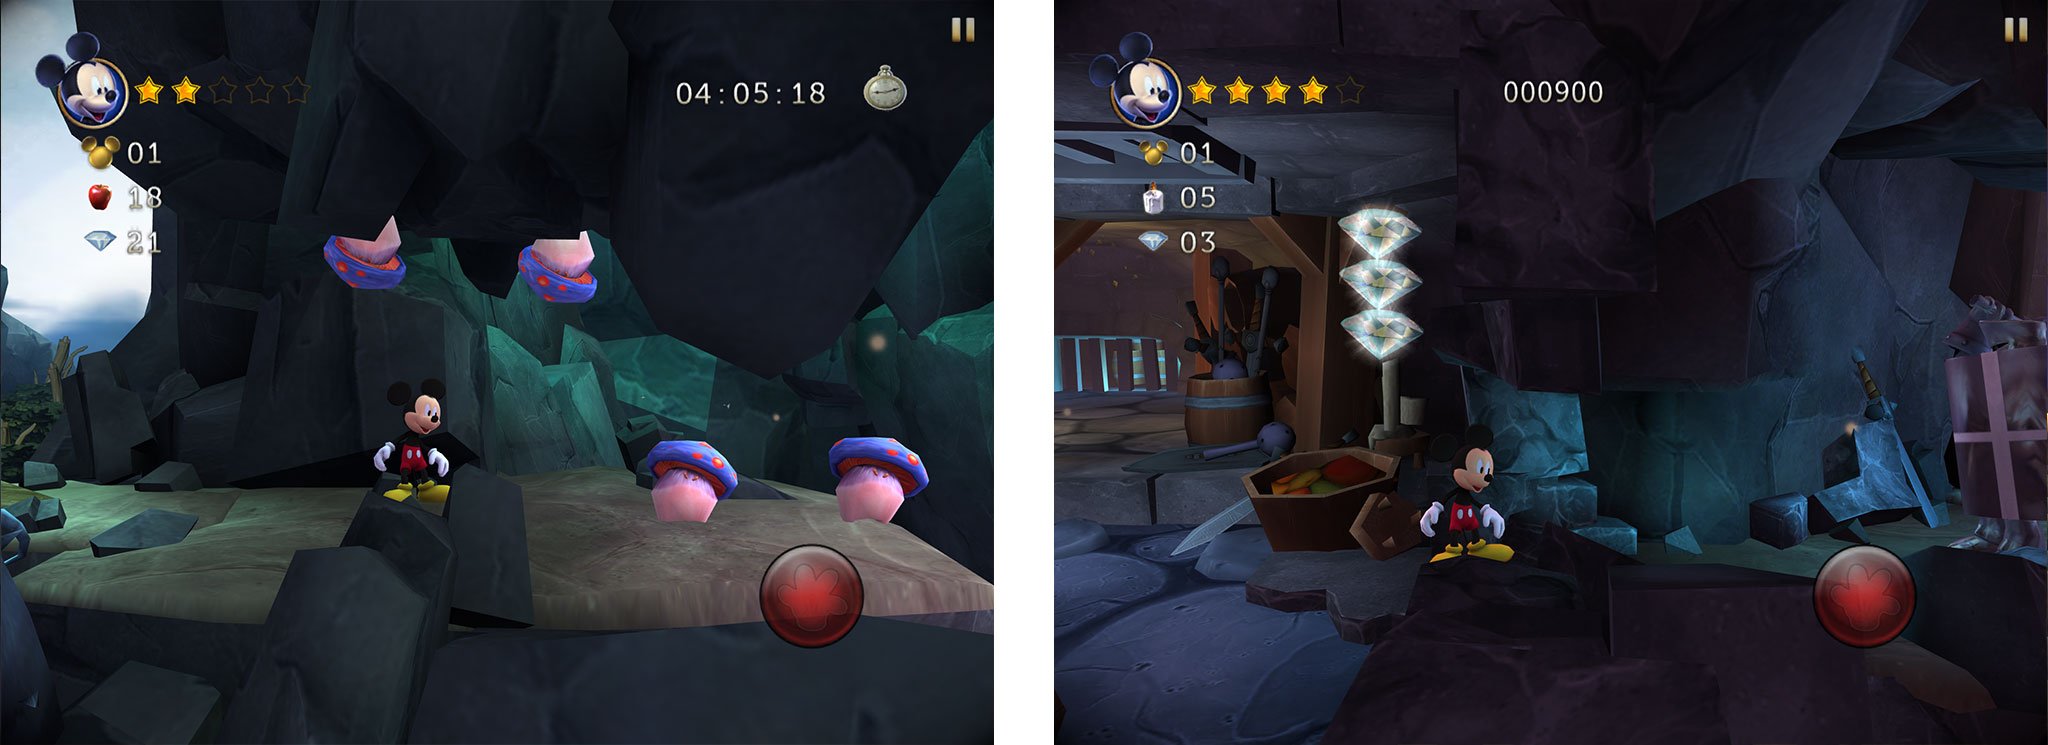 Castle of Illusion tips, tricks, and cheats: Be strategic about when you throw instead of jump